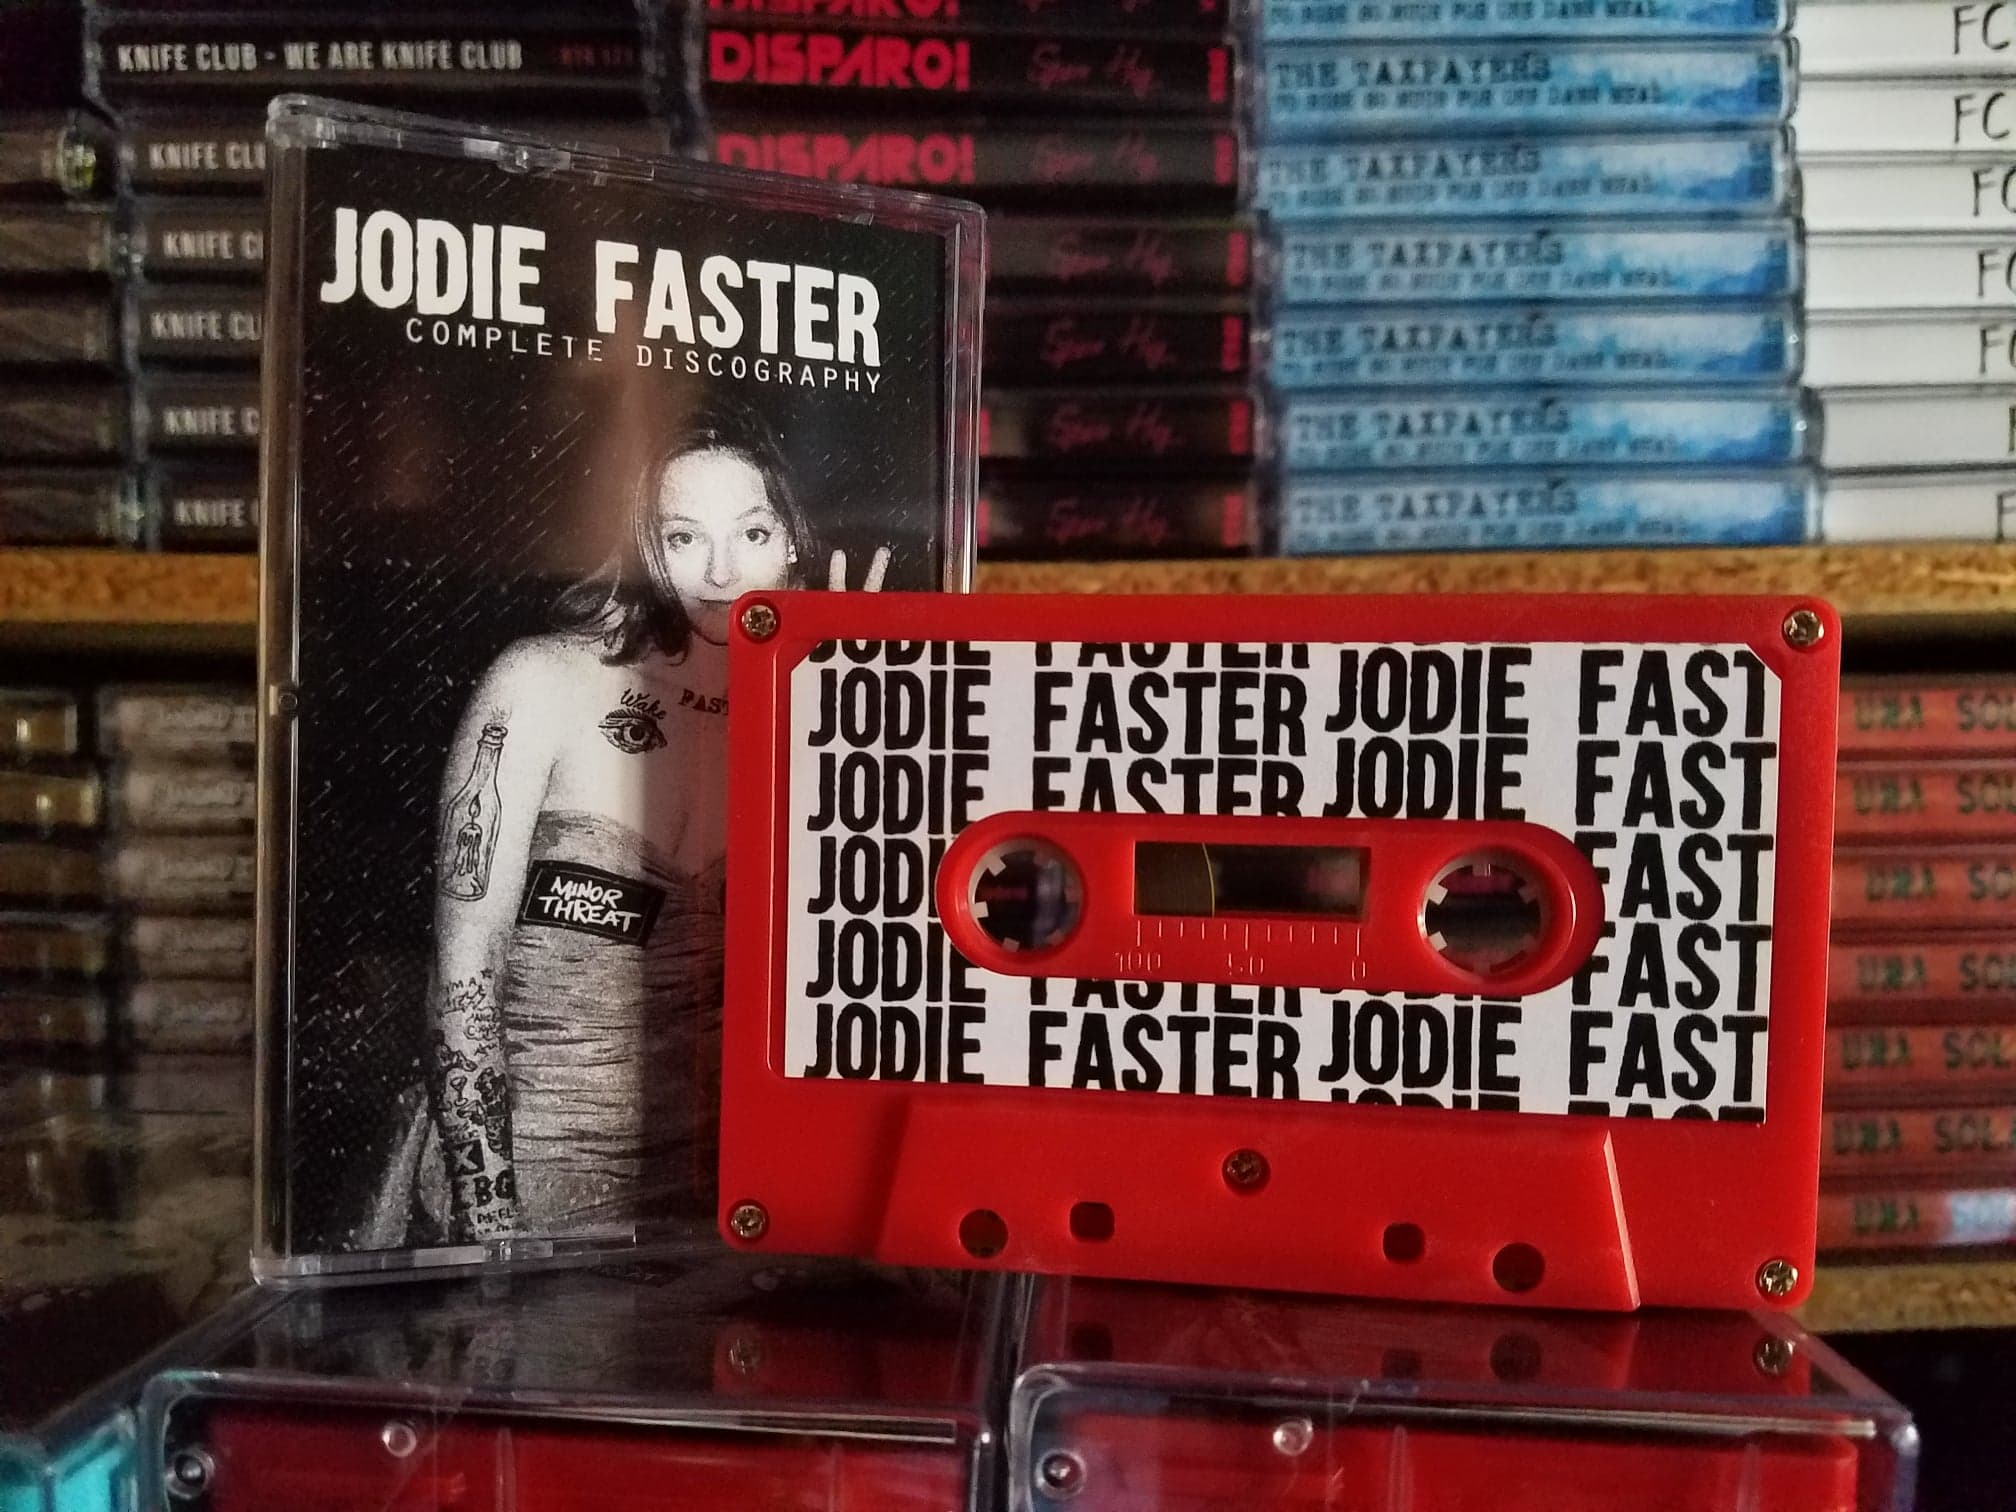 Jodie Faster - COMPLETE DISCOGRAPHY Cassette - Red